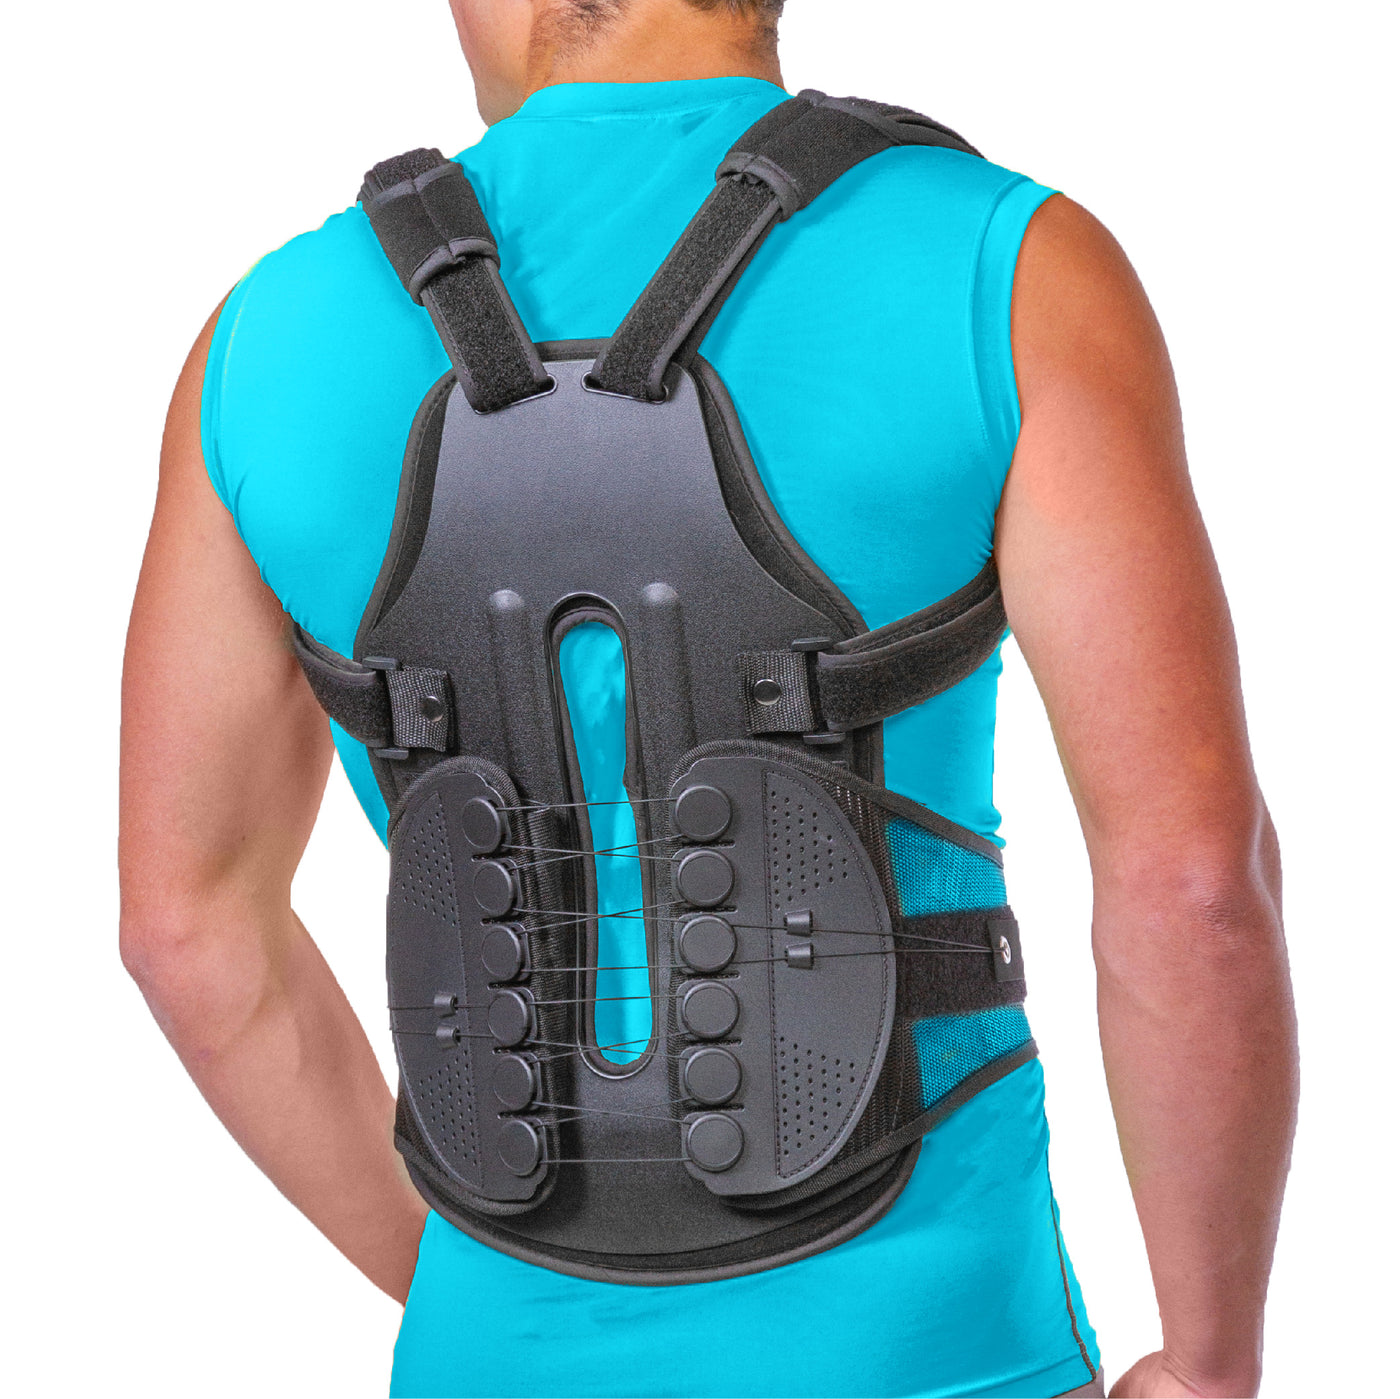 TLSO throacic full back brace posture corrector for kyphosis, scoliosis, osteoporosis & spine compression fractures